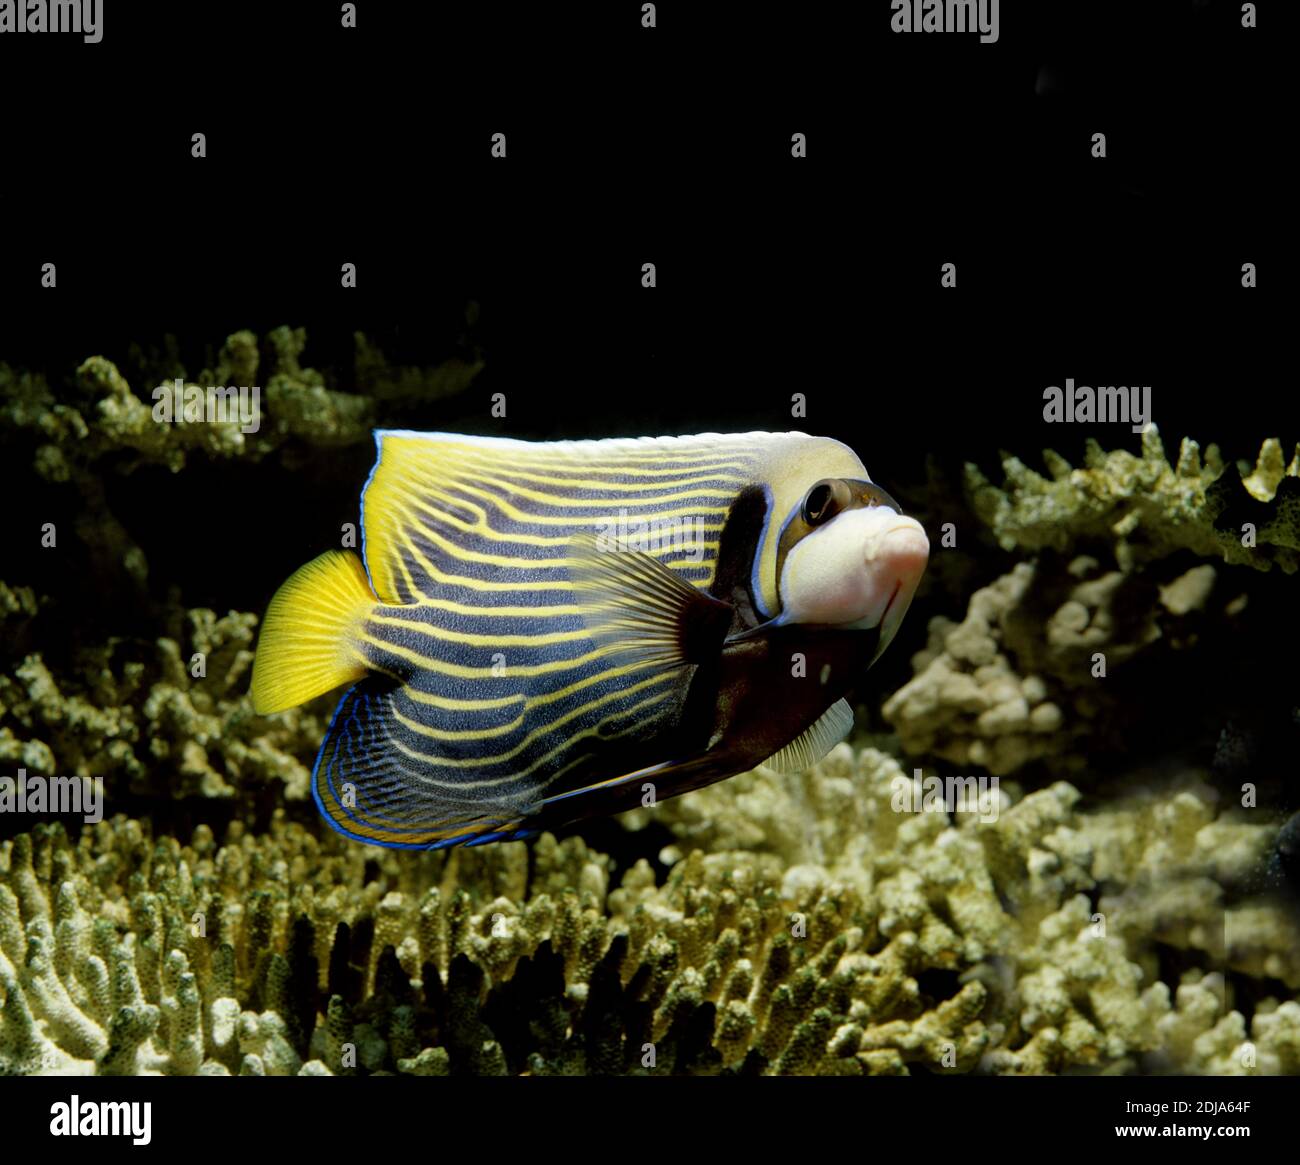 Emperor Angelfish Pomacanthus imperator, Banque D'Images